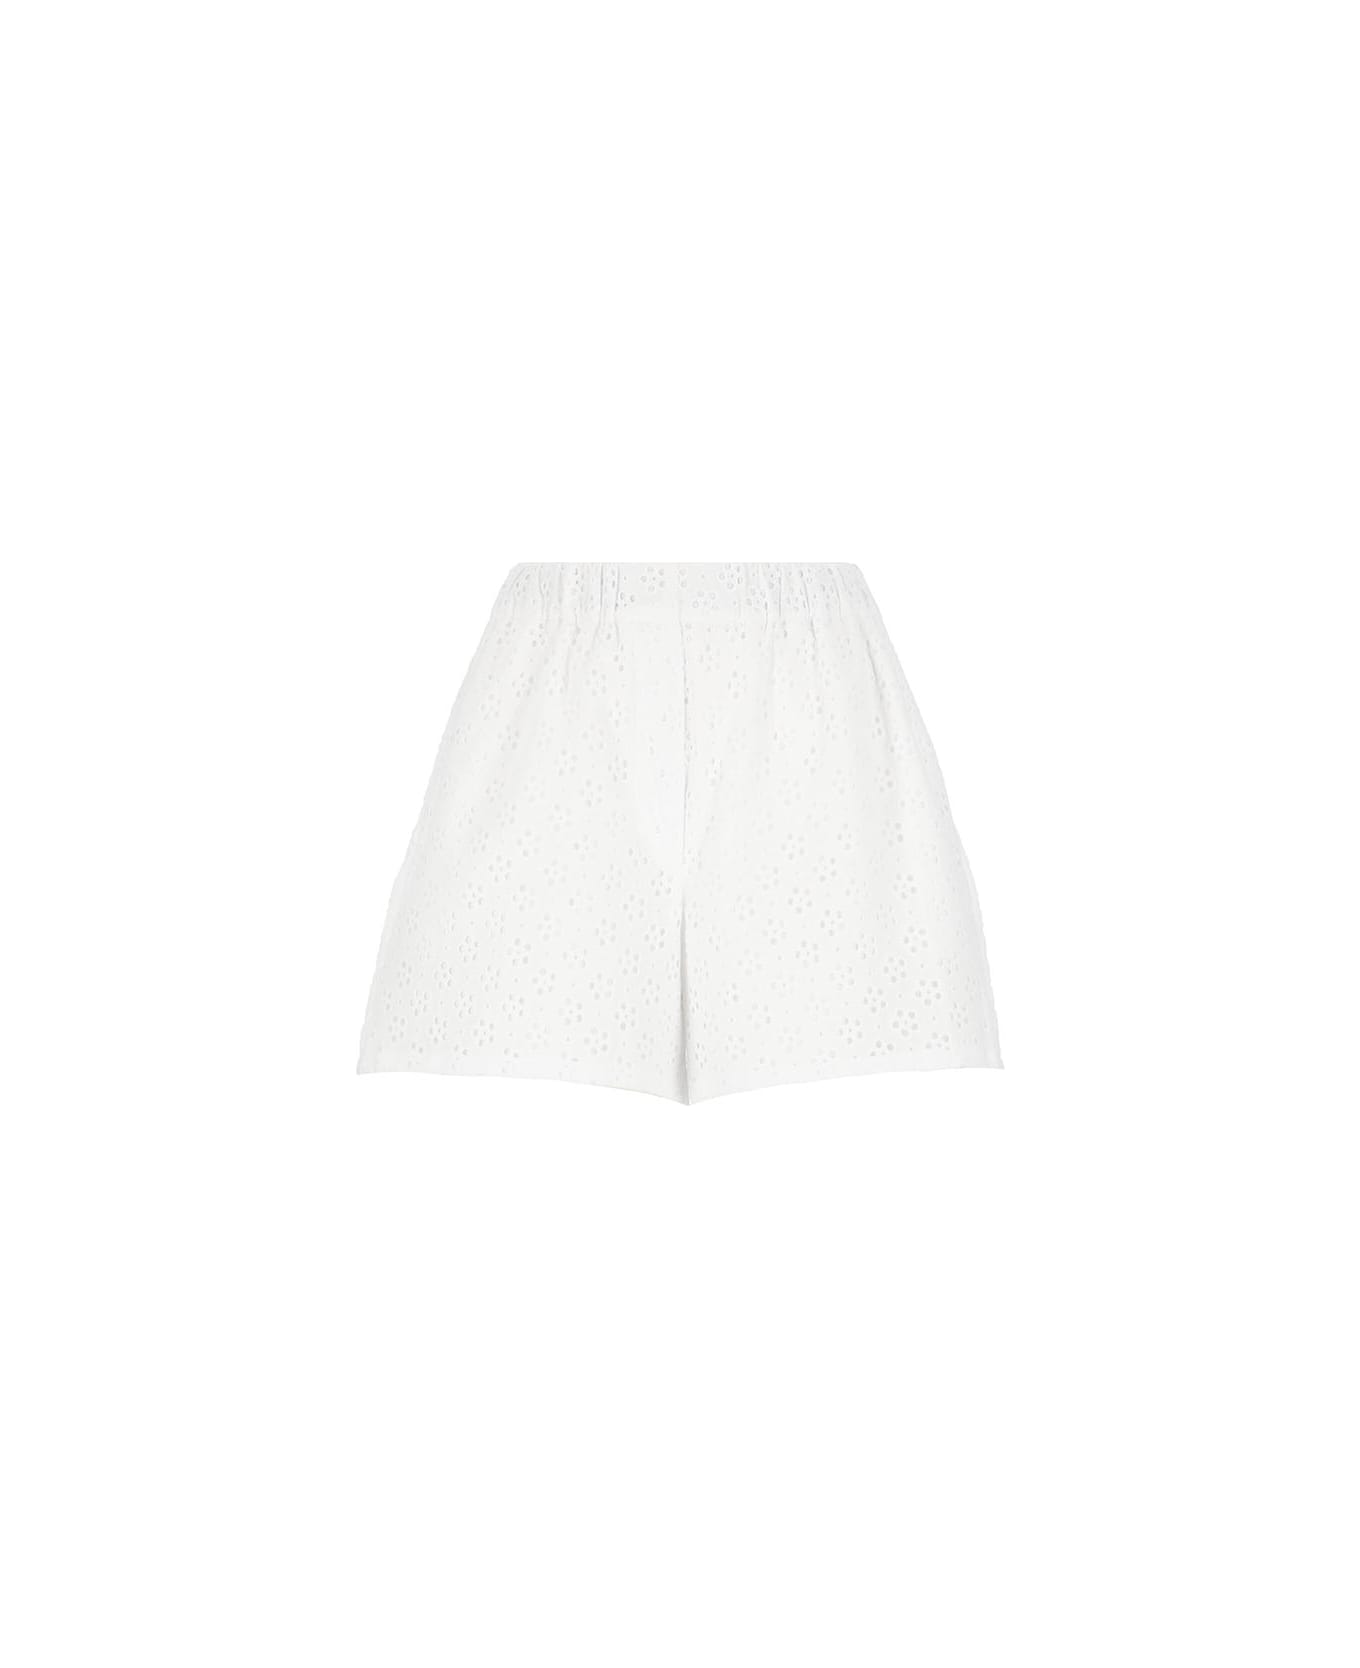 Kenzo Broderie Anglaise Shorts - White ショートパンツ